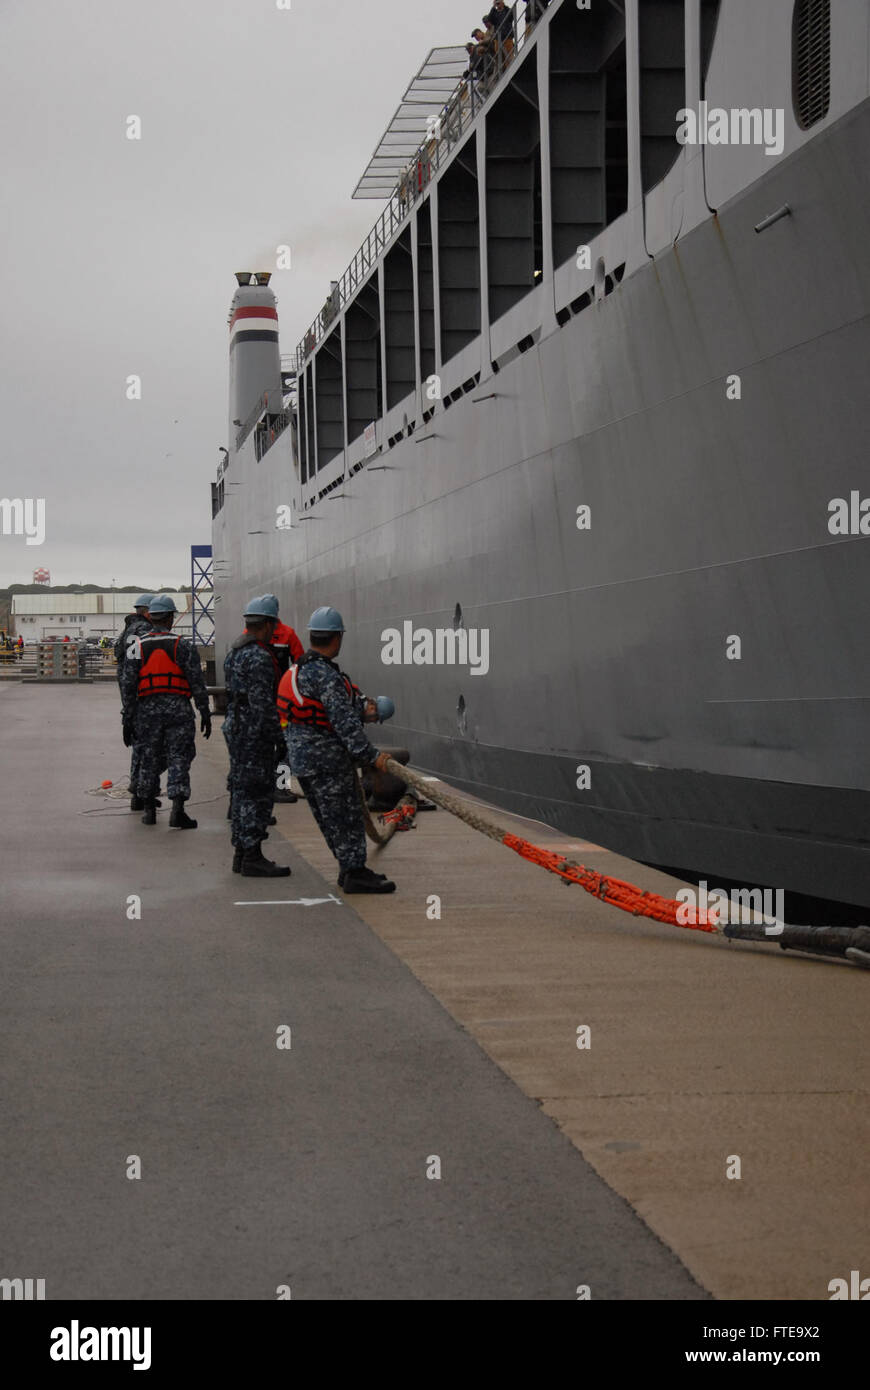 140213-N-UI568-425: ROTA, Spain (Feb. 13, 2014) – Sailors assigned to Naval Station Rota handle lines for the arrival of the container ship MV Cape Ray (T-AKR 9679) for a scheduled port visit. The vessel was modified to contribute to the United Nations and the Organization for the Prohibition of Chemical Weapons joint mission to eliminate Syria's chemical weapons materials. (U.S. Navy photo by Morgan Over/Released) Join the conversation on Twitter ( https://twitter.com/naveur navaf )  follow us on Facebook ( https://www.facebook.com/USNavalForcesEuropeAfrica )  and while you're at it check us  Stock Photo